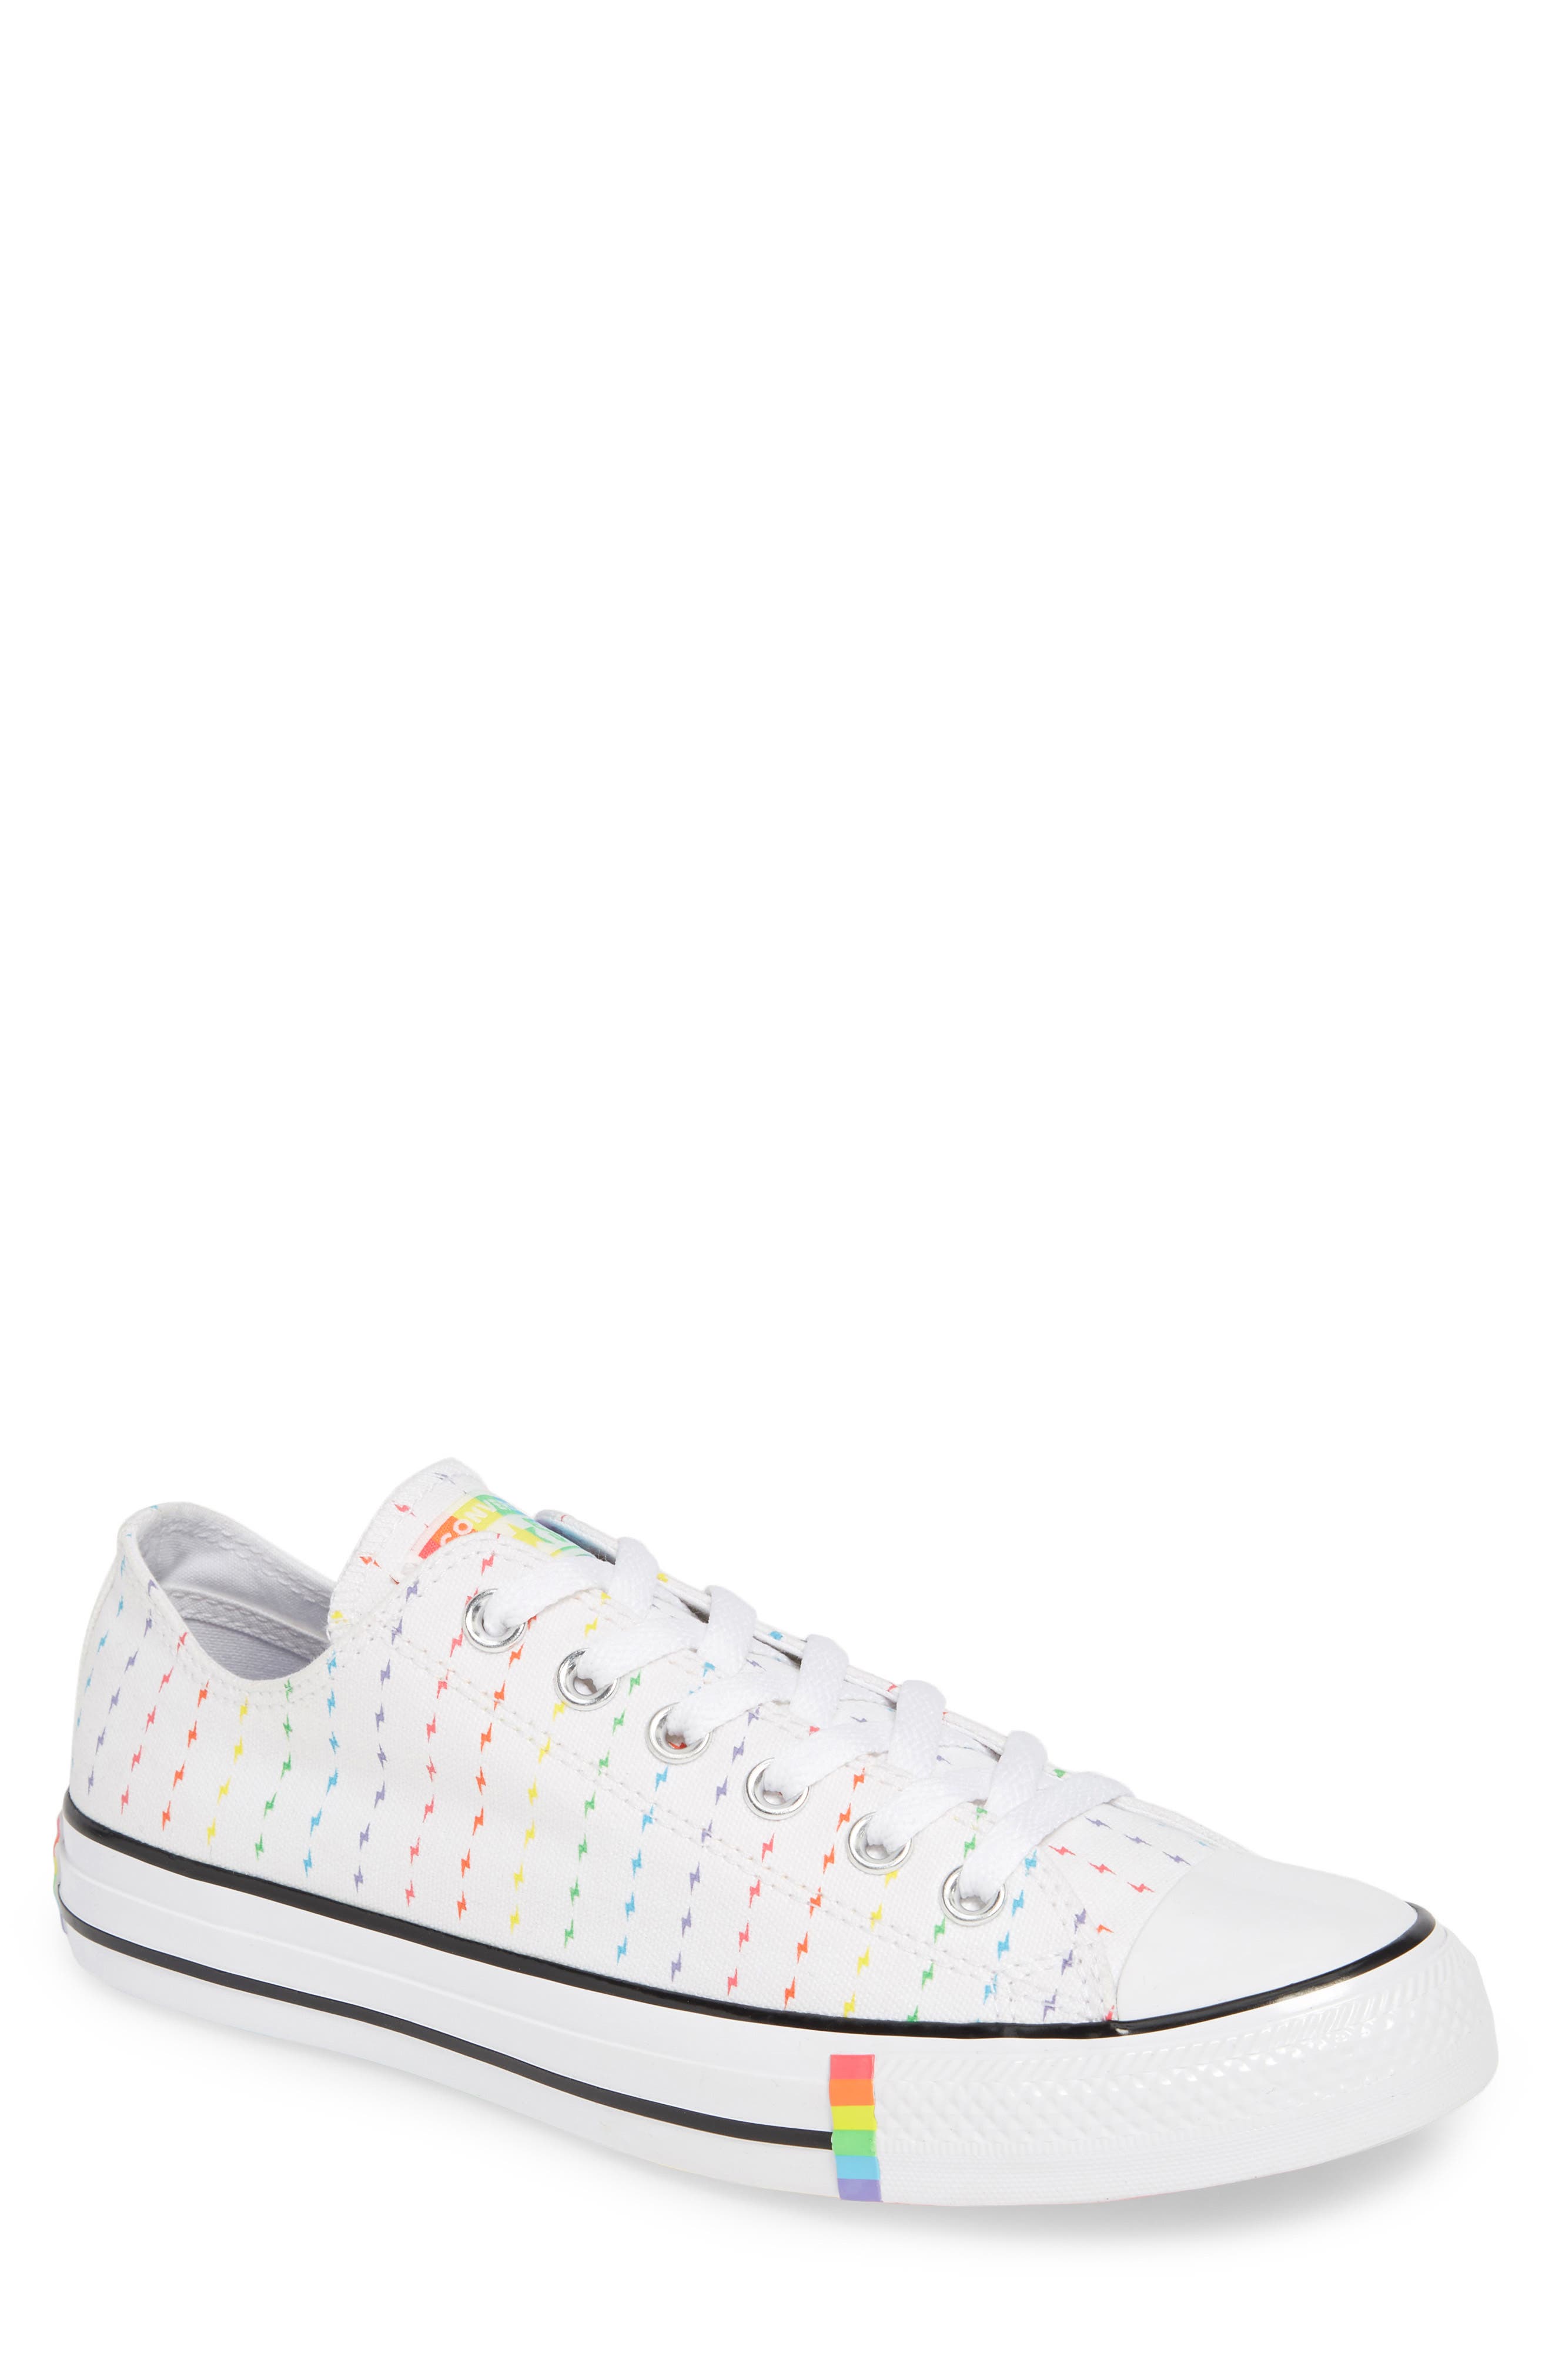 chuck taylor all star low top pride sneaker